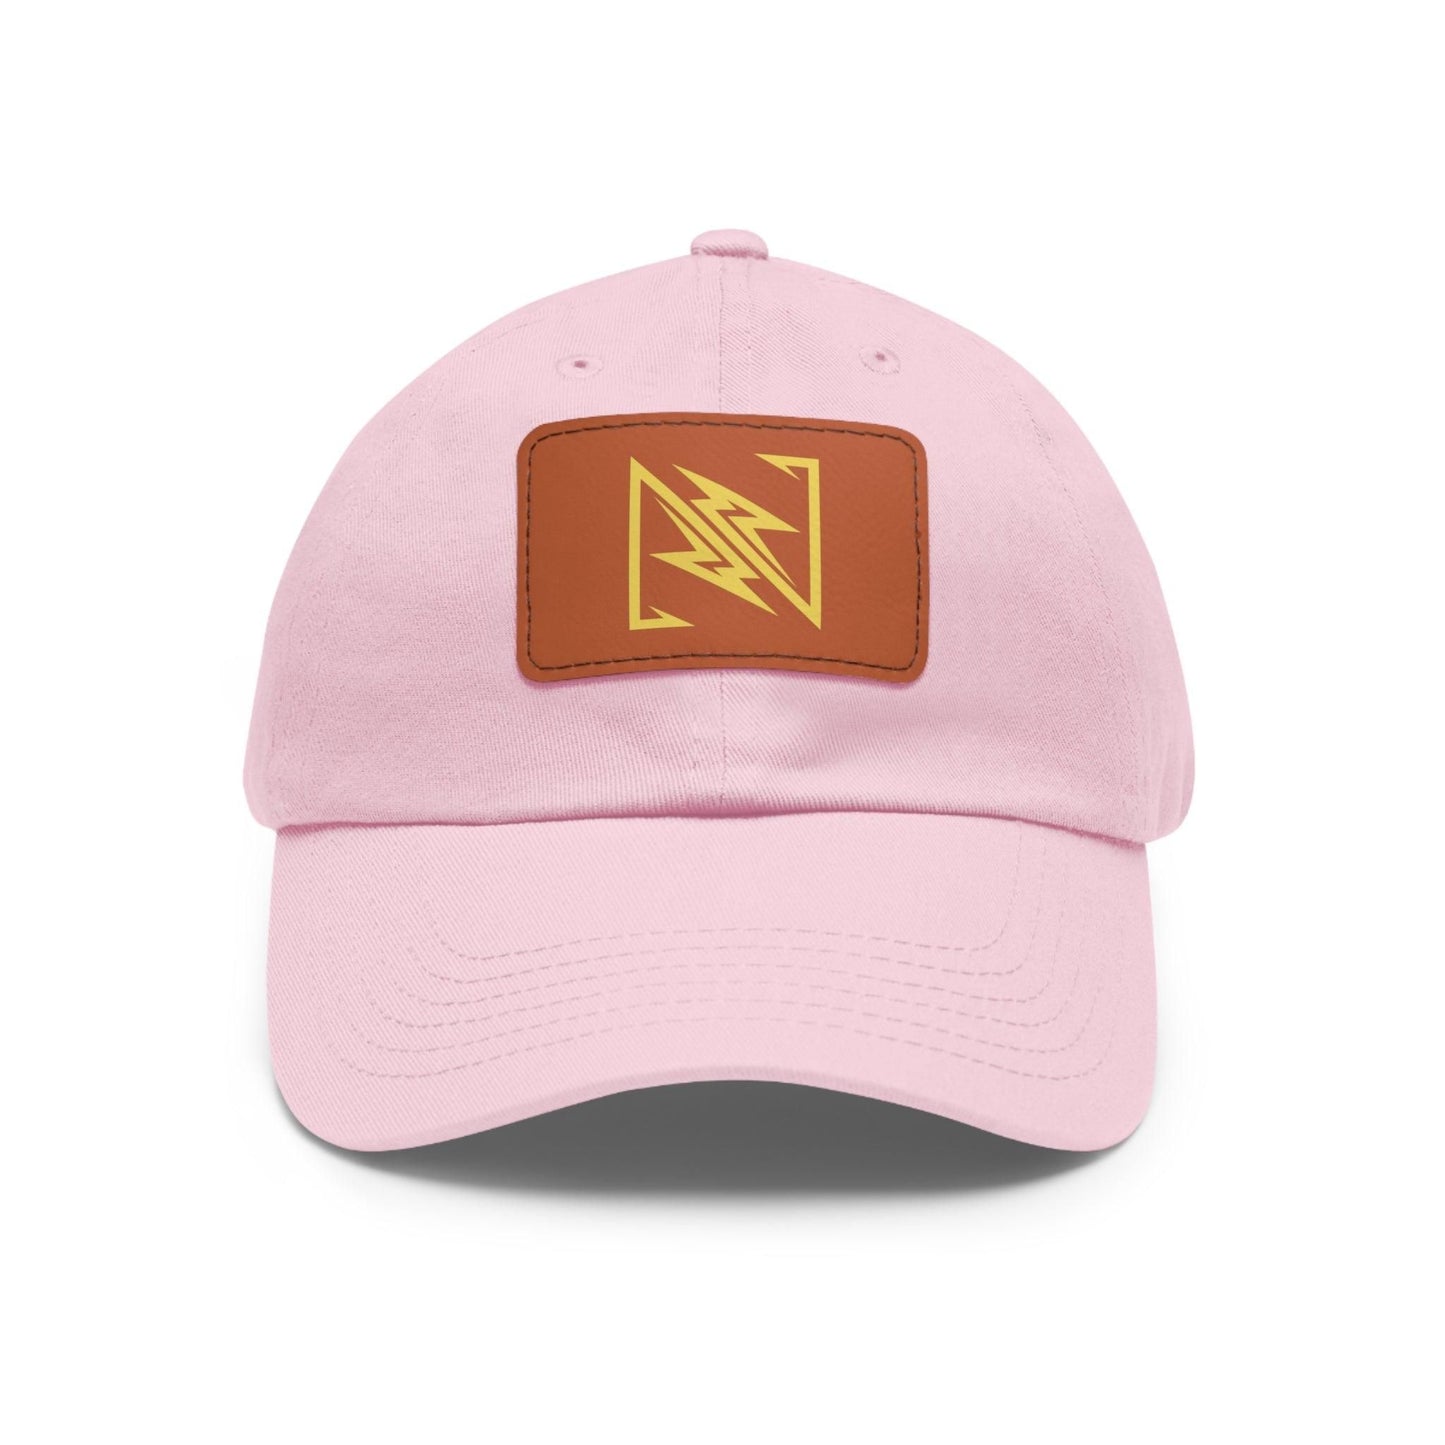 NX Vogue Premium Baseball Hat with Leather Patch Cap Light Pink / Light Brown patch Rectangle One size